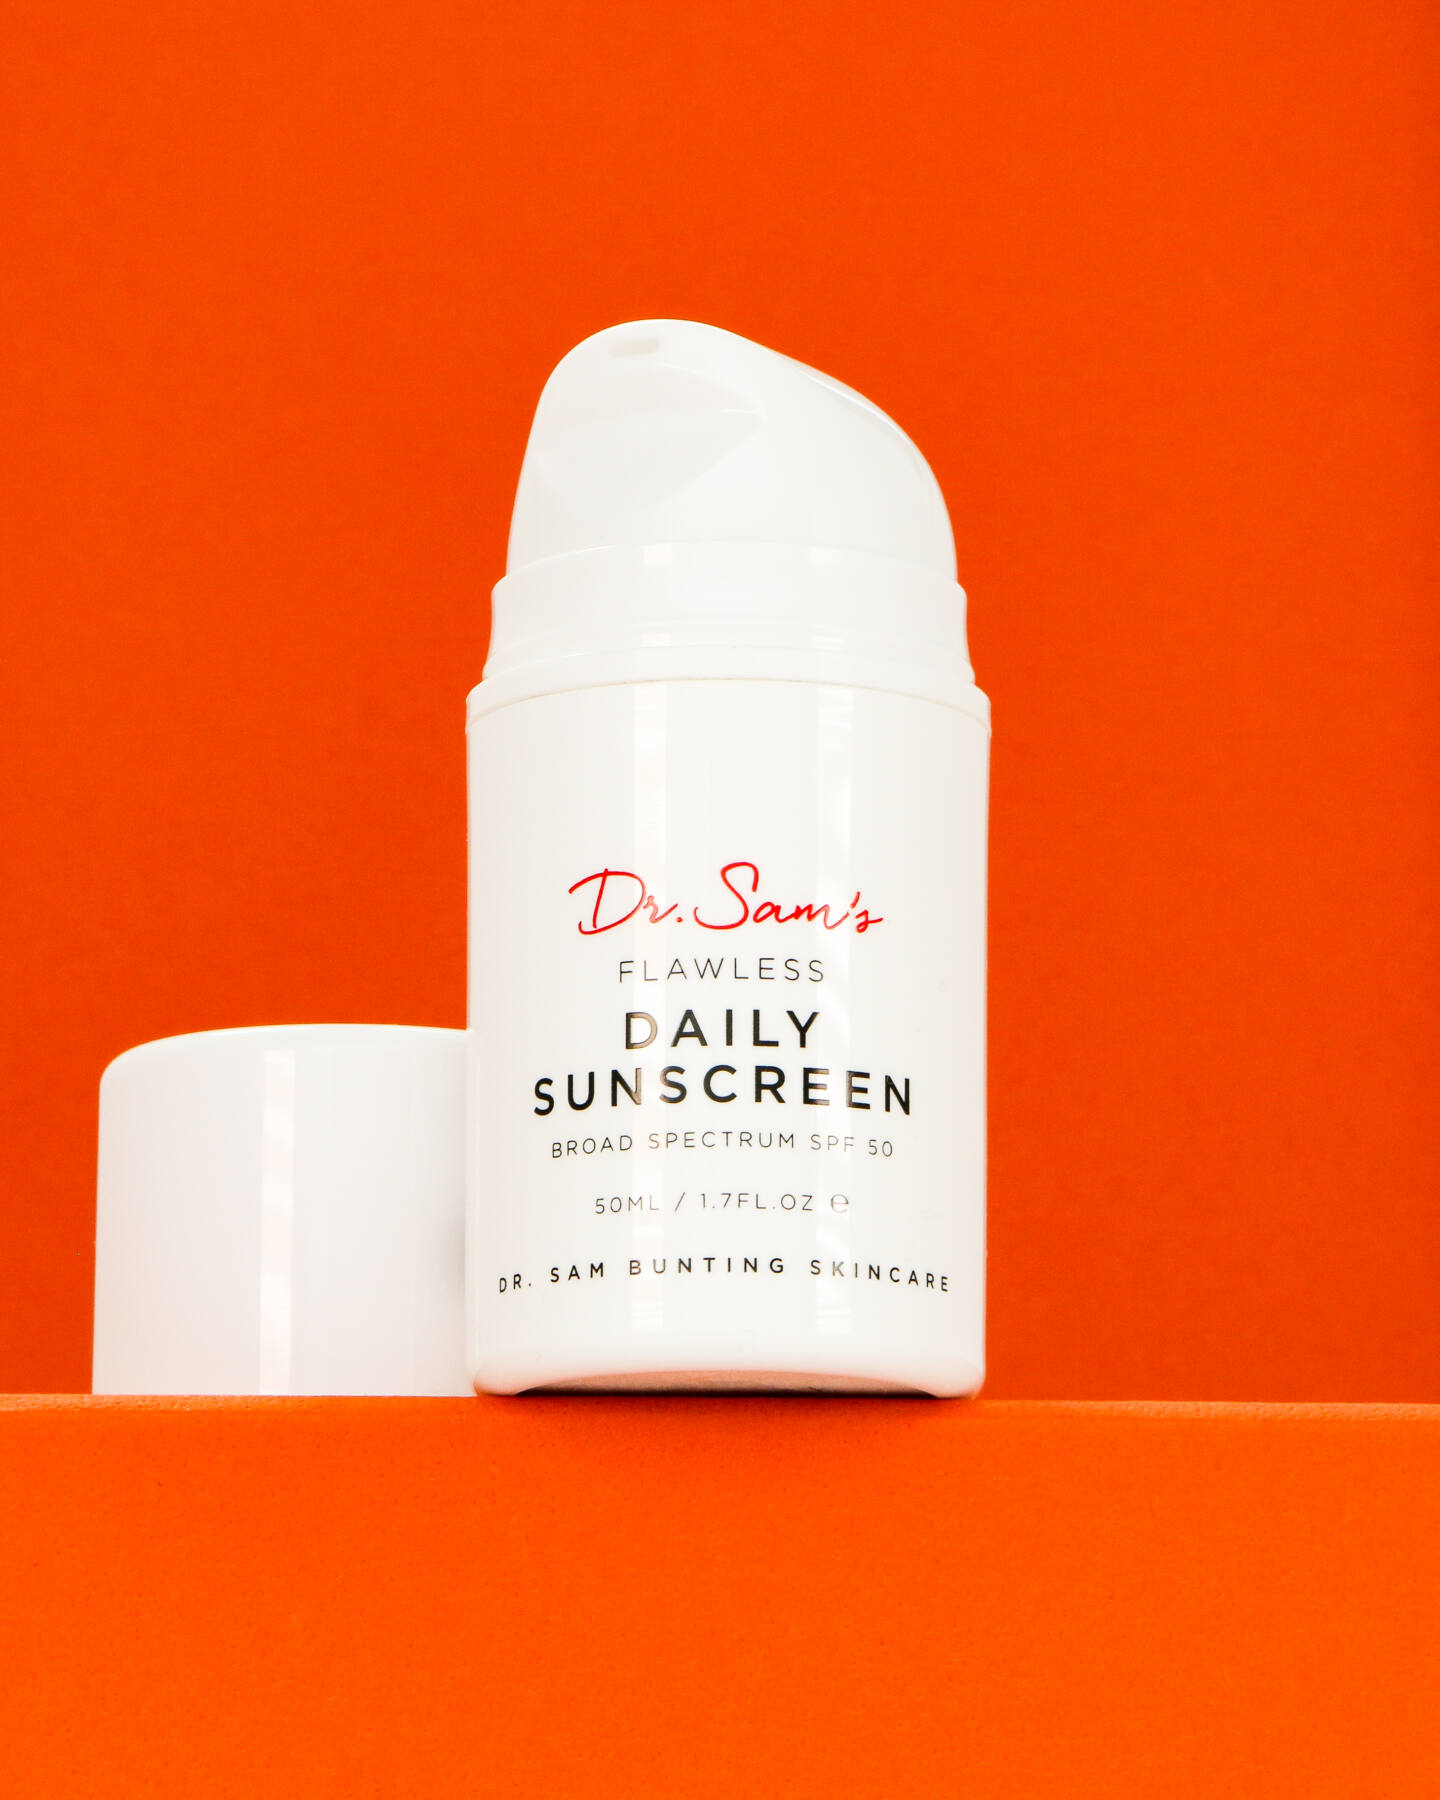 Dr. Sam Bunting Flawless Daily Sunscreen SPF 50